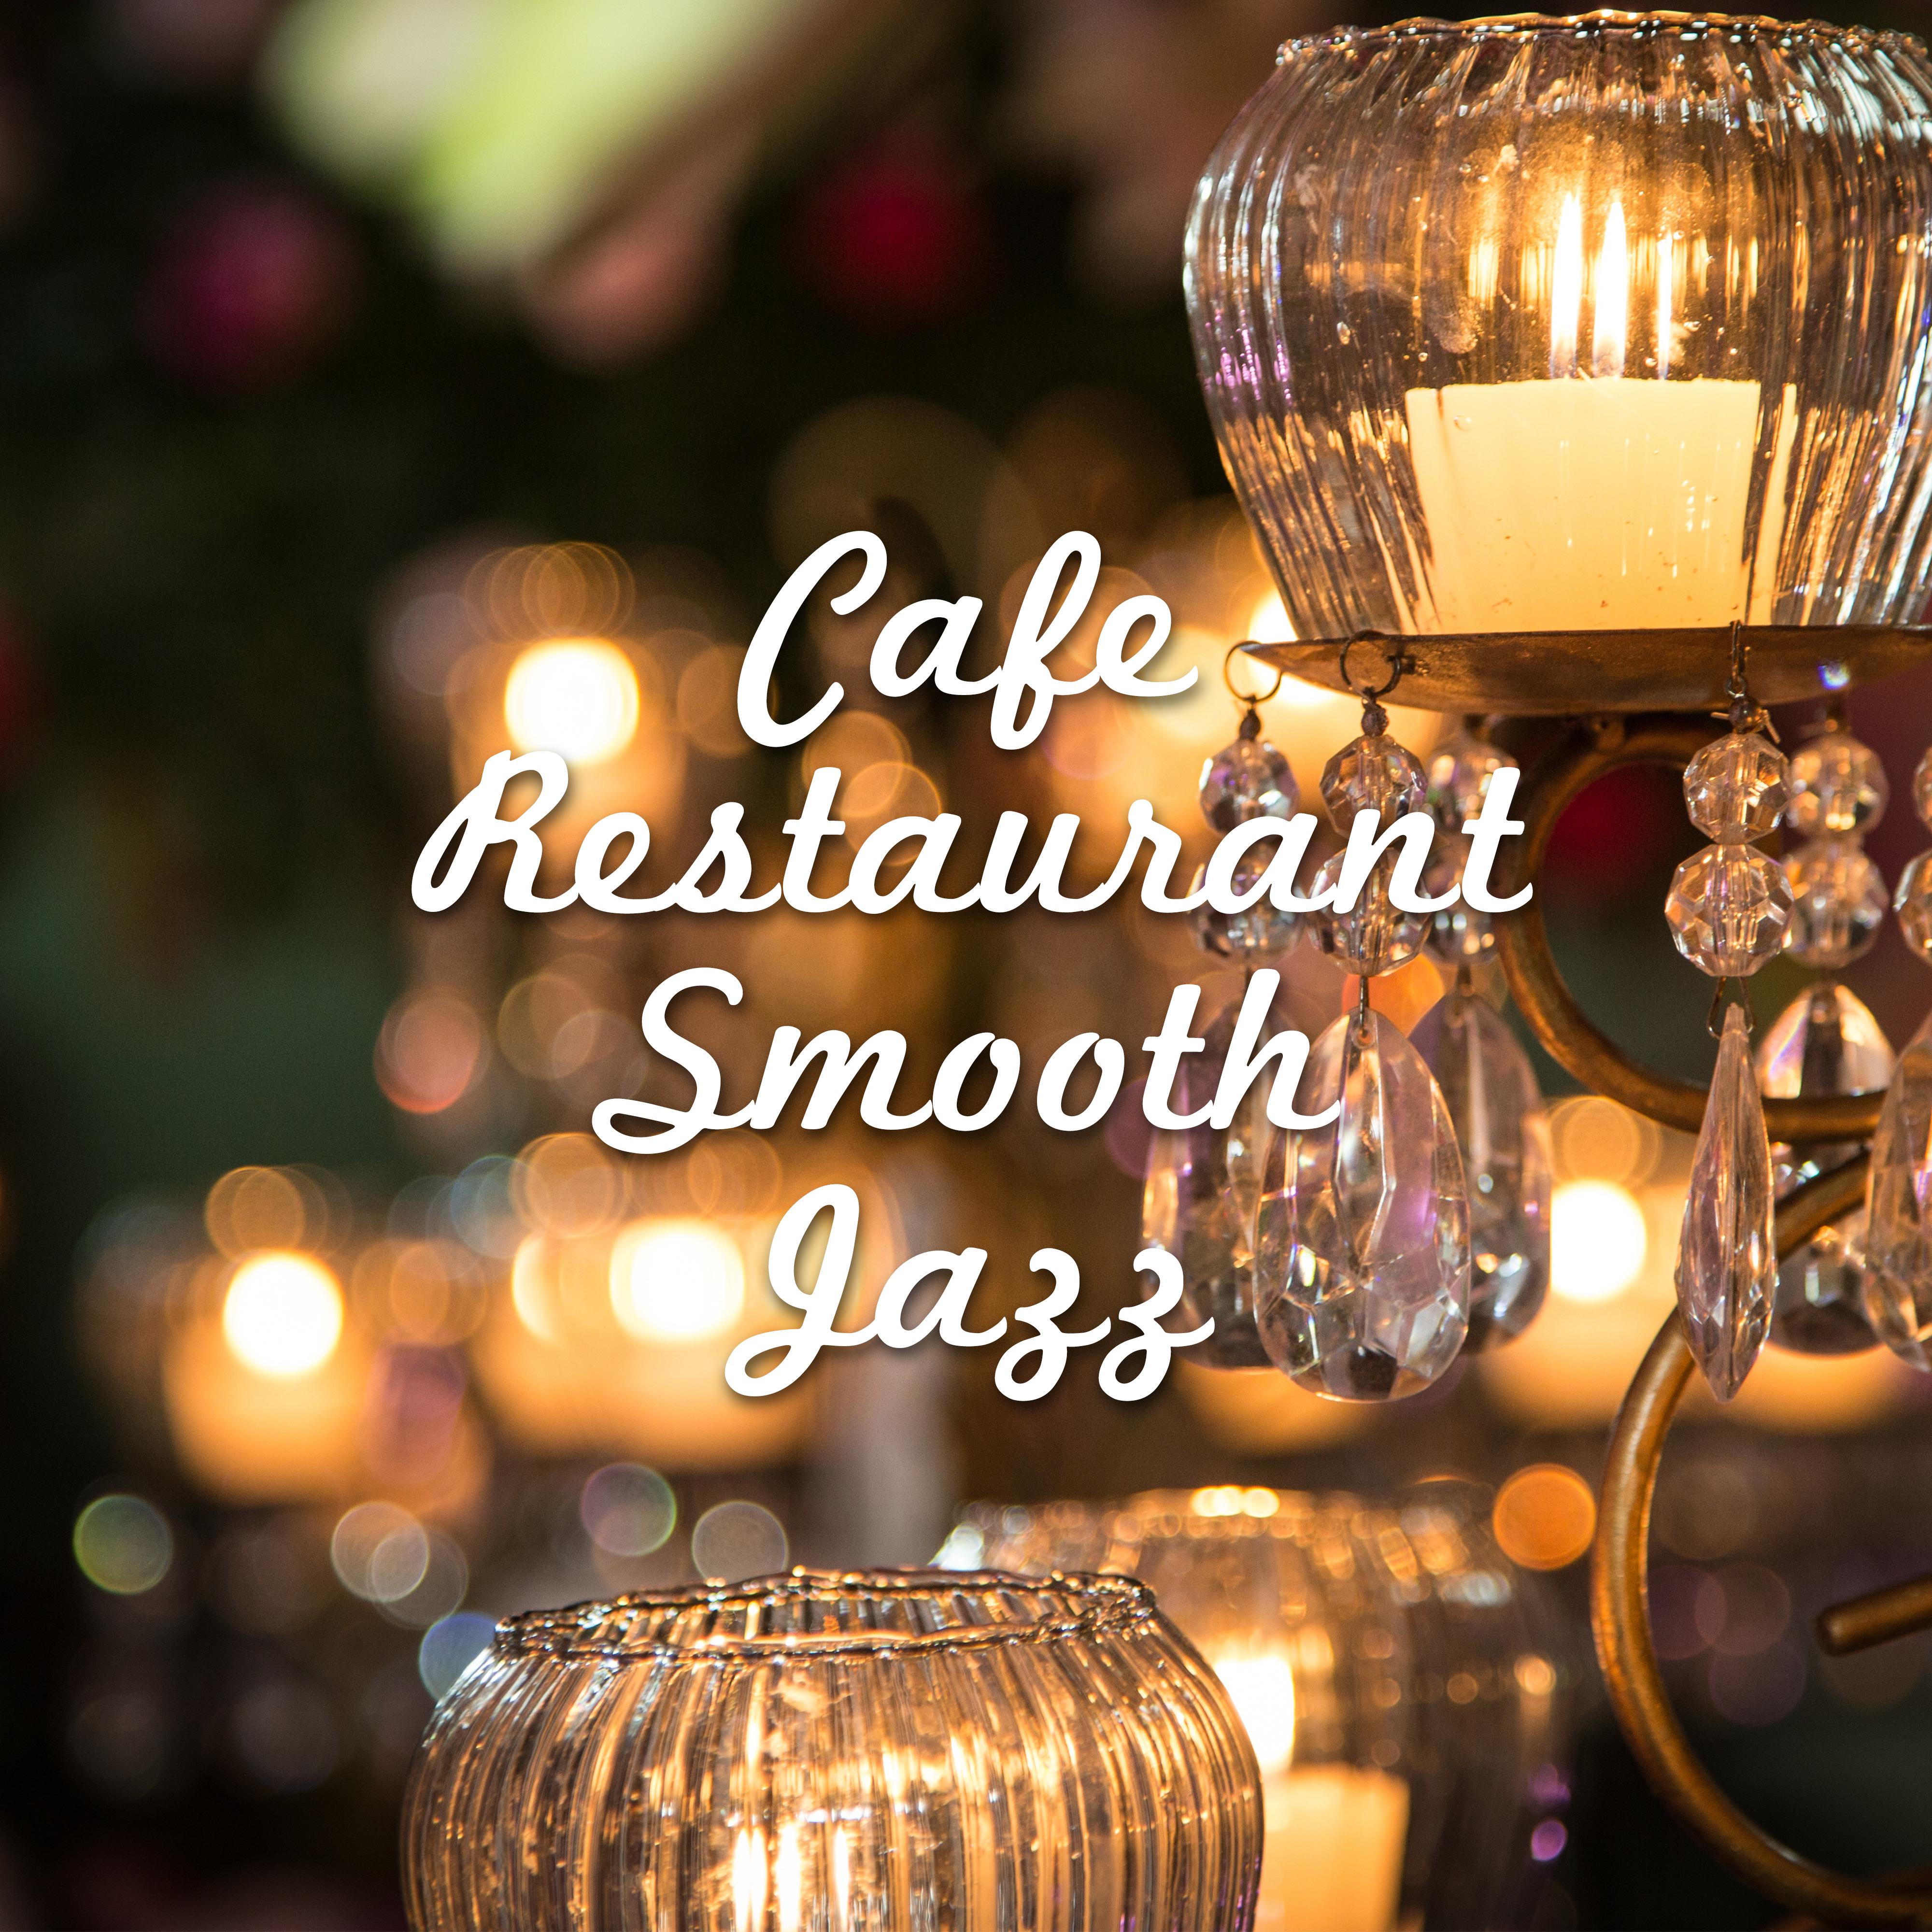 Cafe Restaurant Smooth Jazz – Chilled Jazz Music, Piano Relaxation, Stress Relief, Moonlight Jazz